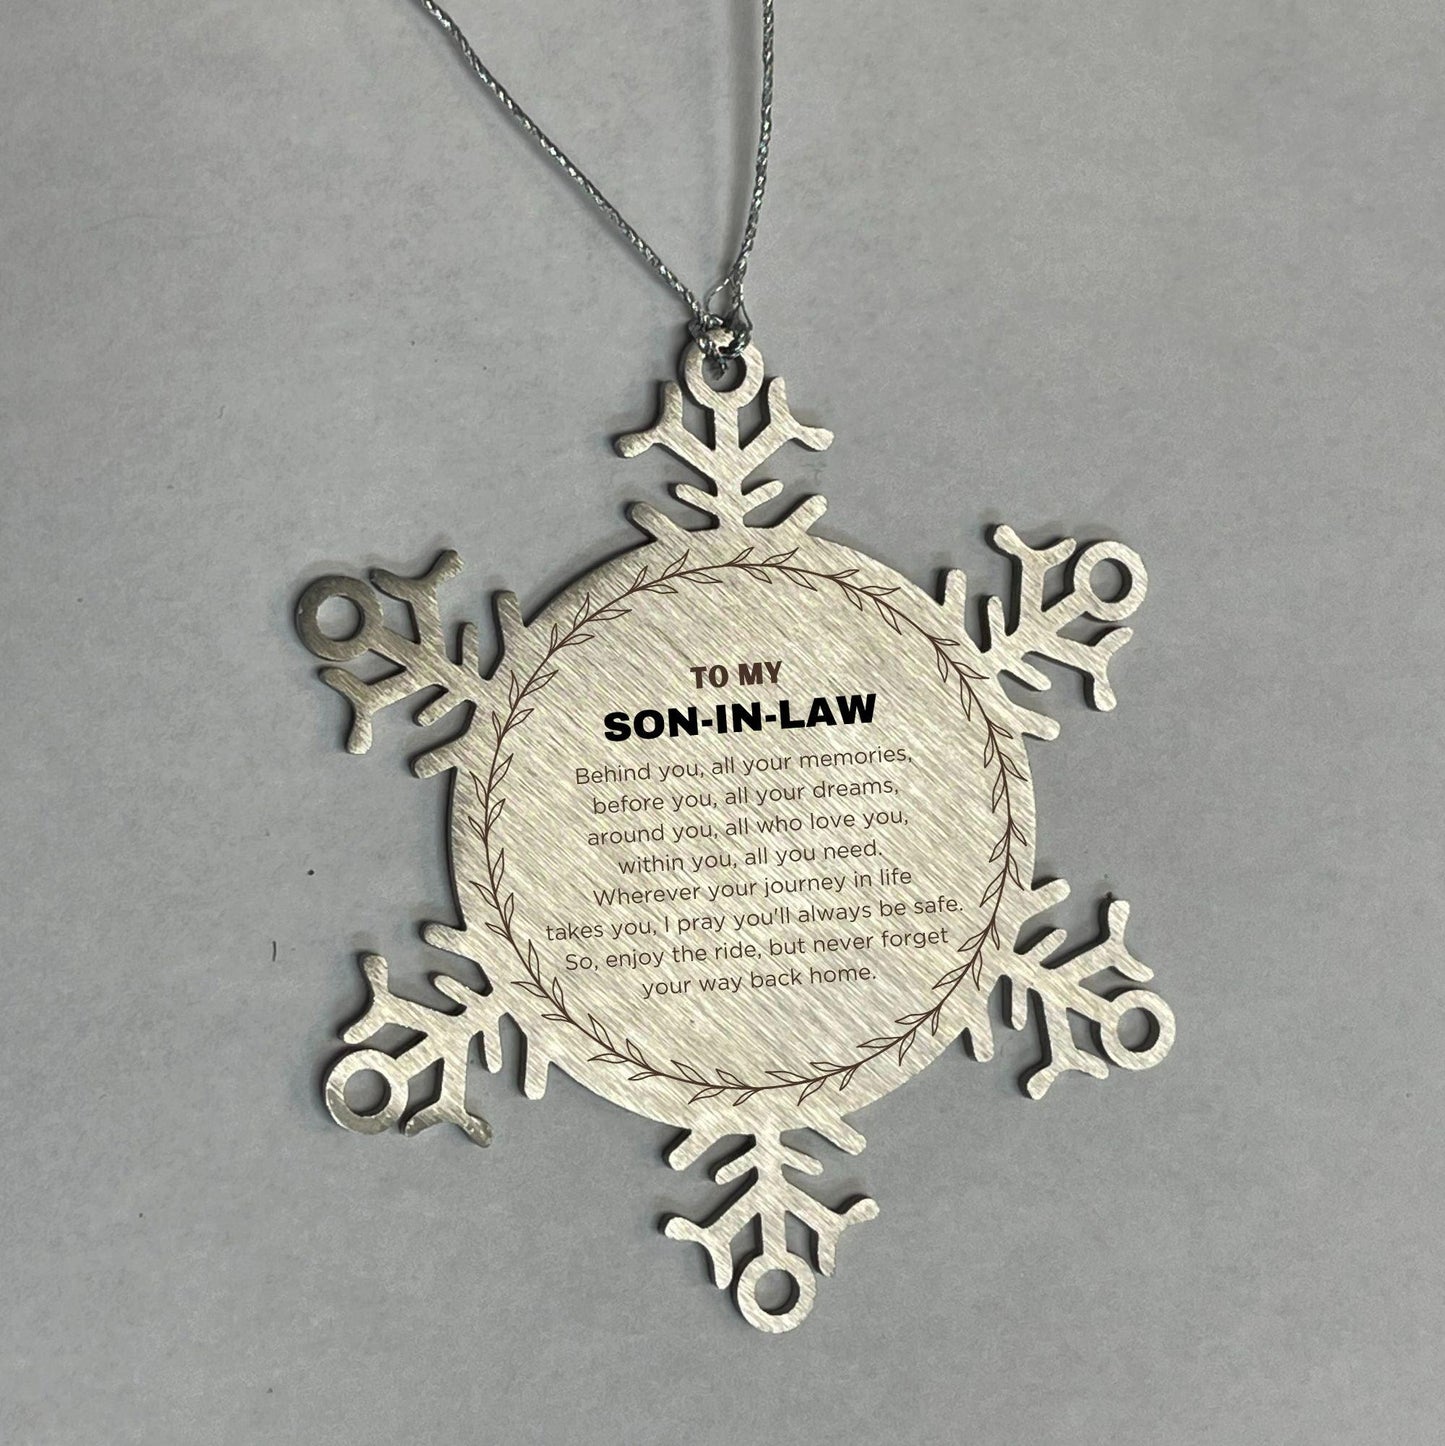 Inspirational Son-in-law Snowflake Ornament - Behind you, all your Memories, Before you, all your Dreams - Birthday, Christmas Holiday Gifts - Mallard Moon Gift Shop